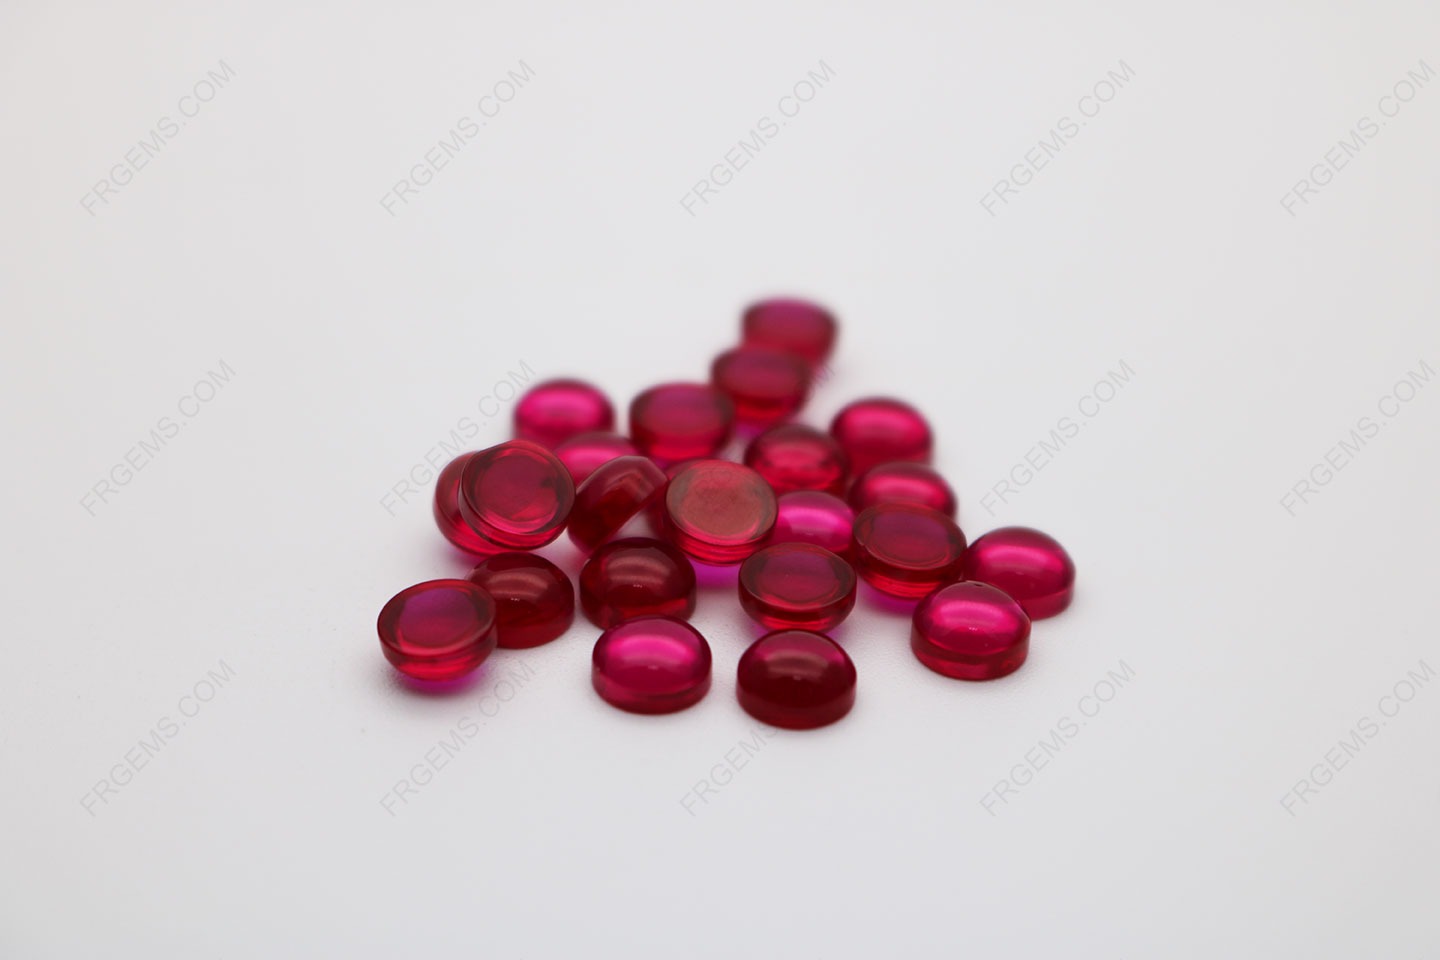 Loose Synthetic Lab Created Corundum Ruby Red 5# Round Shape Cabochon Cut 6.00mm gemstones